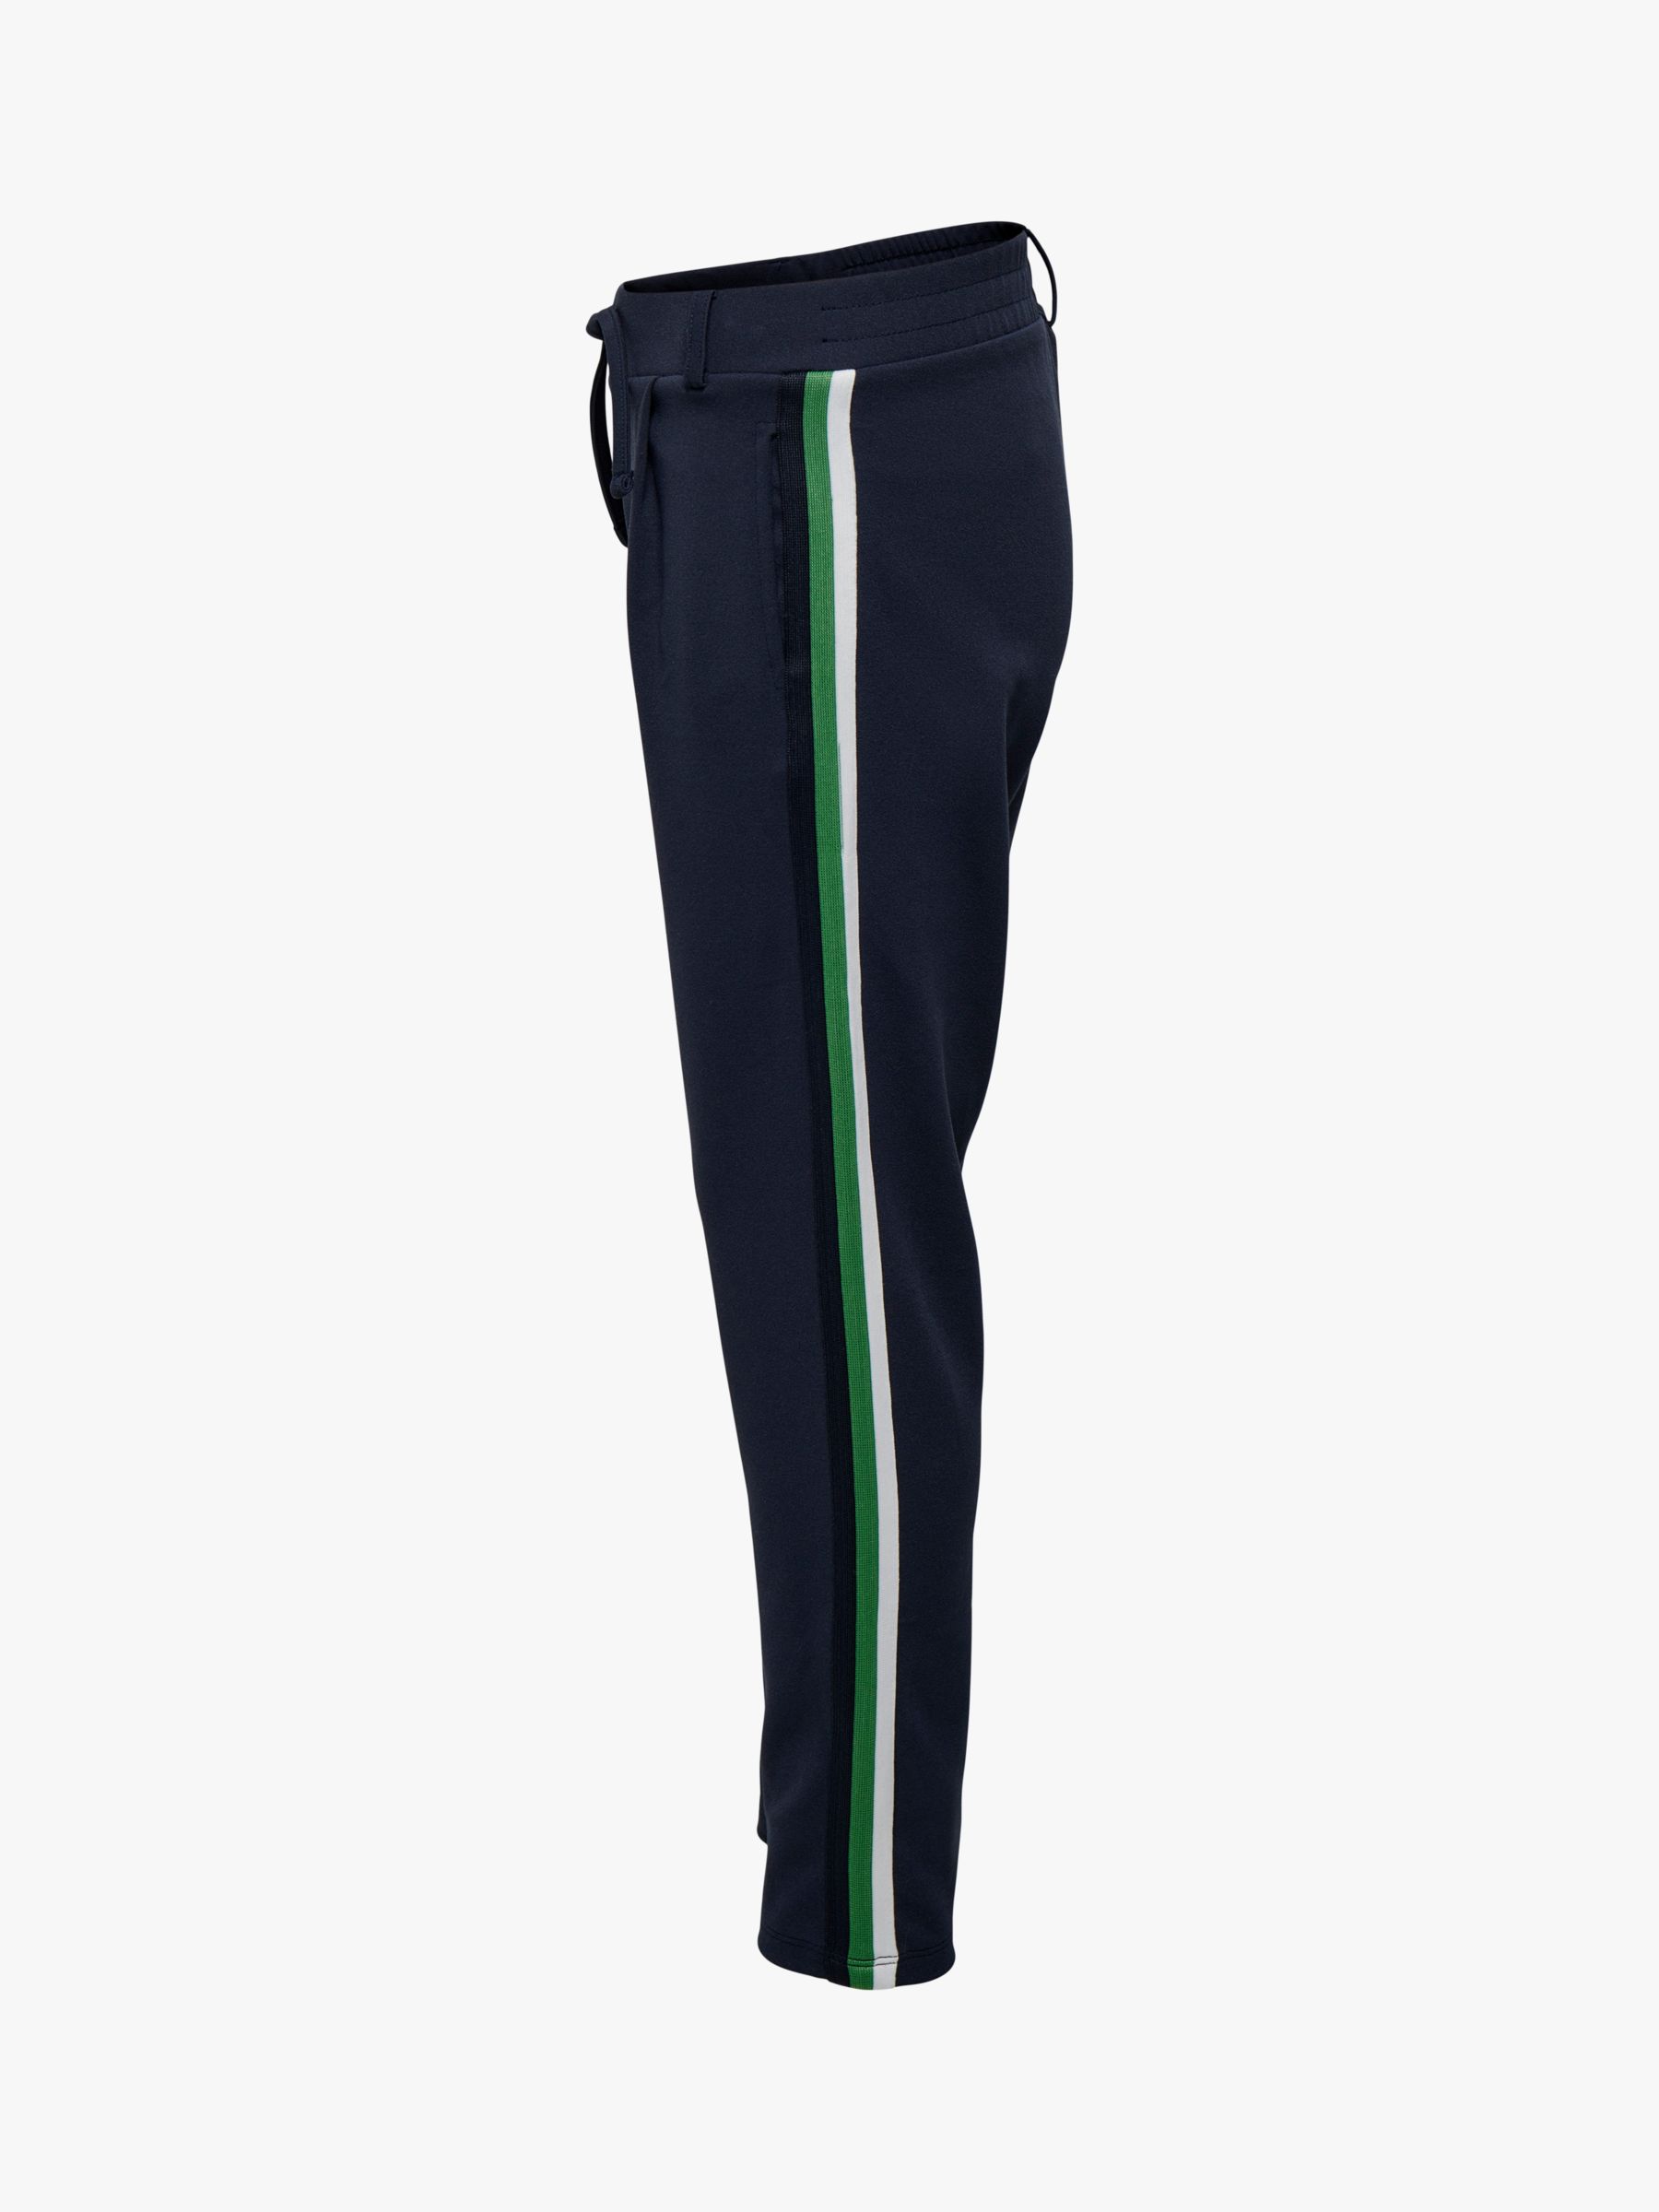 Kids ONLY Kids' Taped Detail Joggers, Navy, 12 years